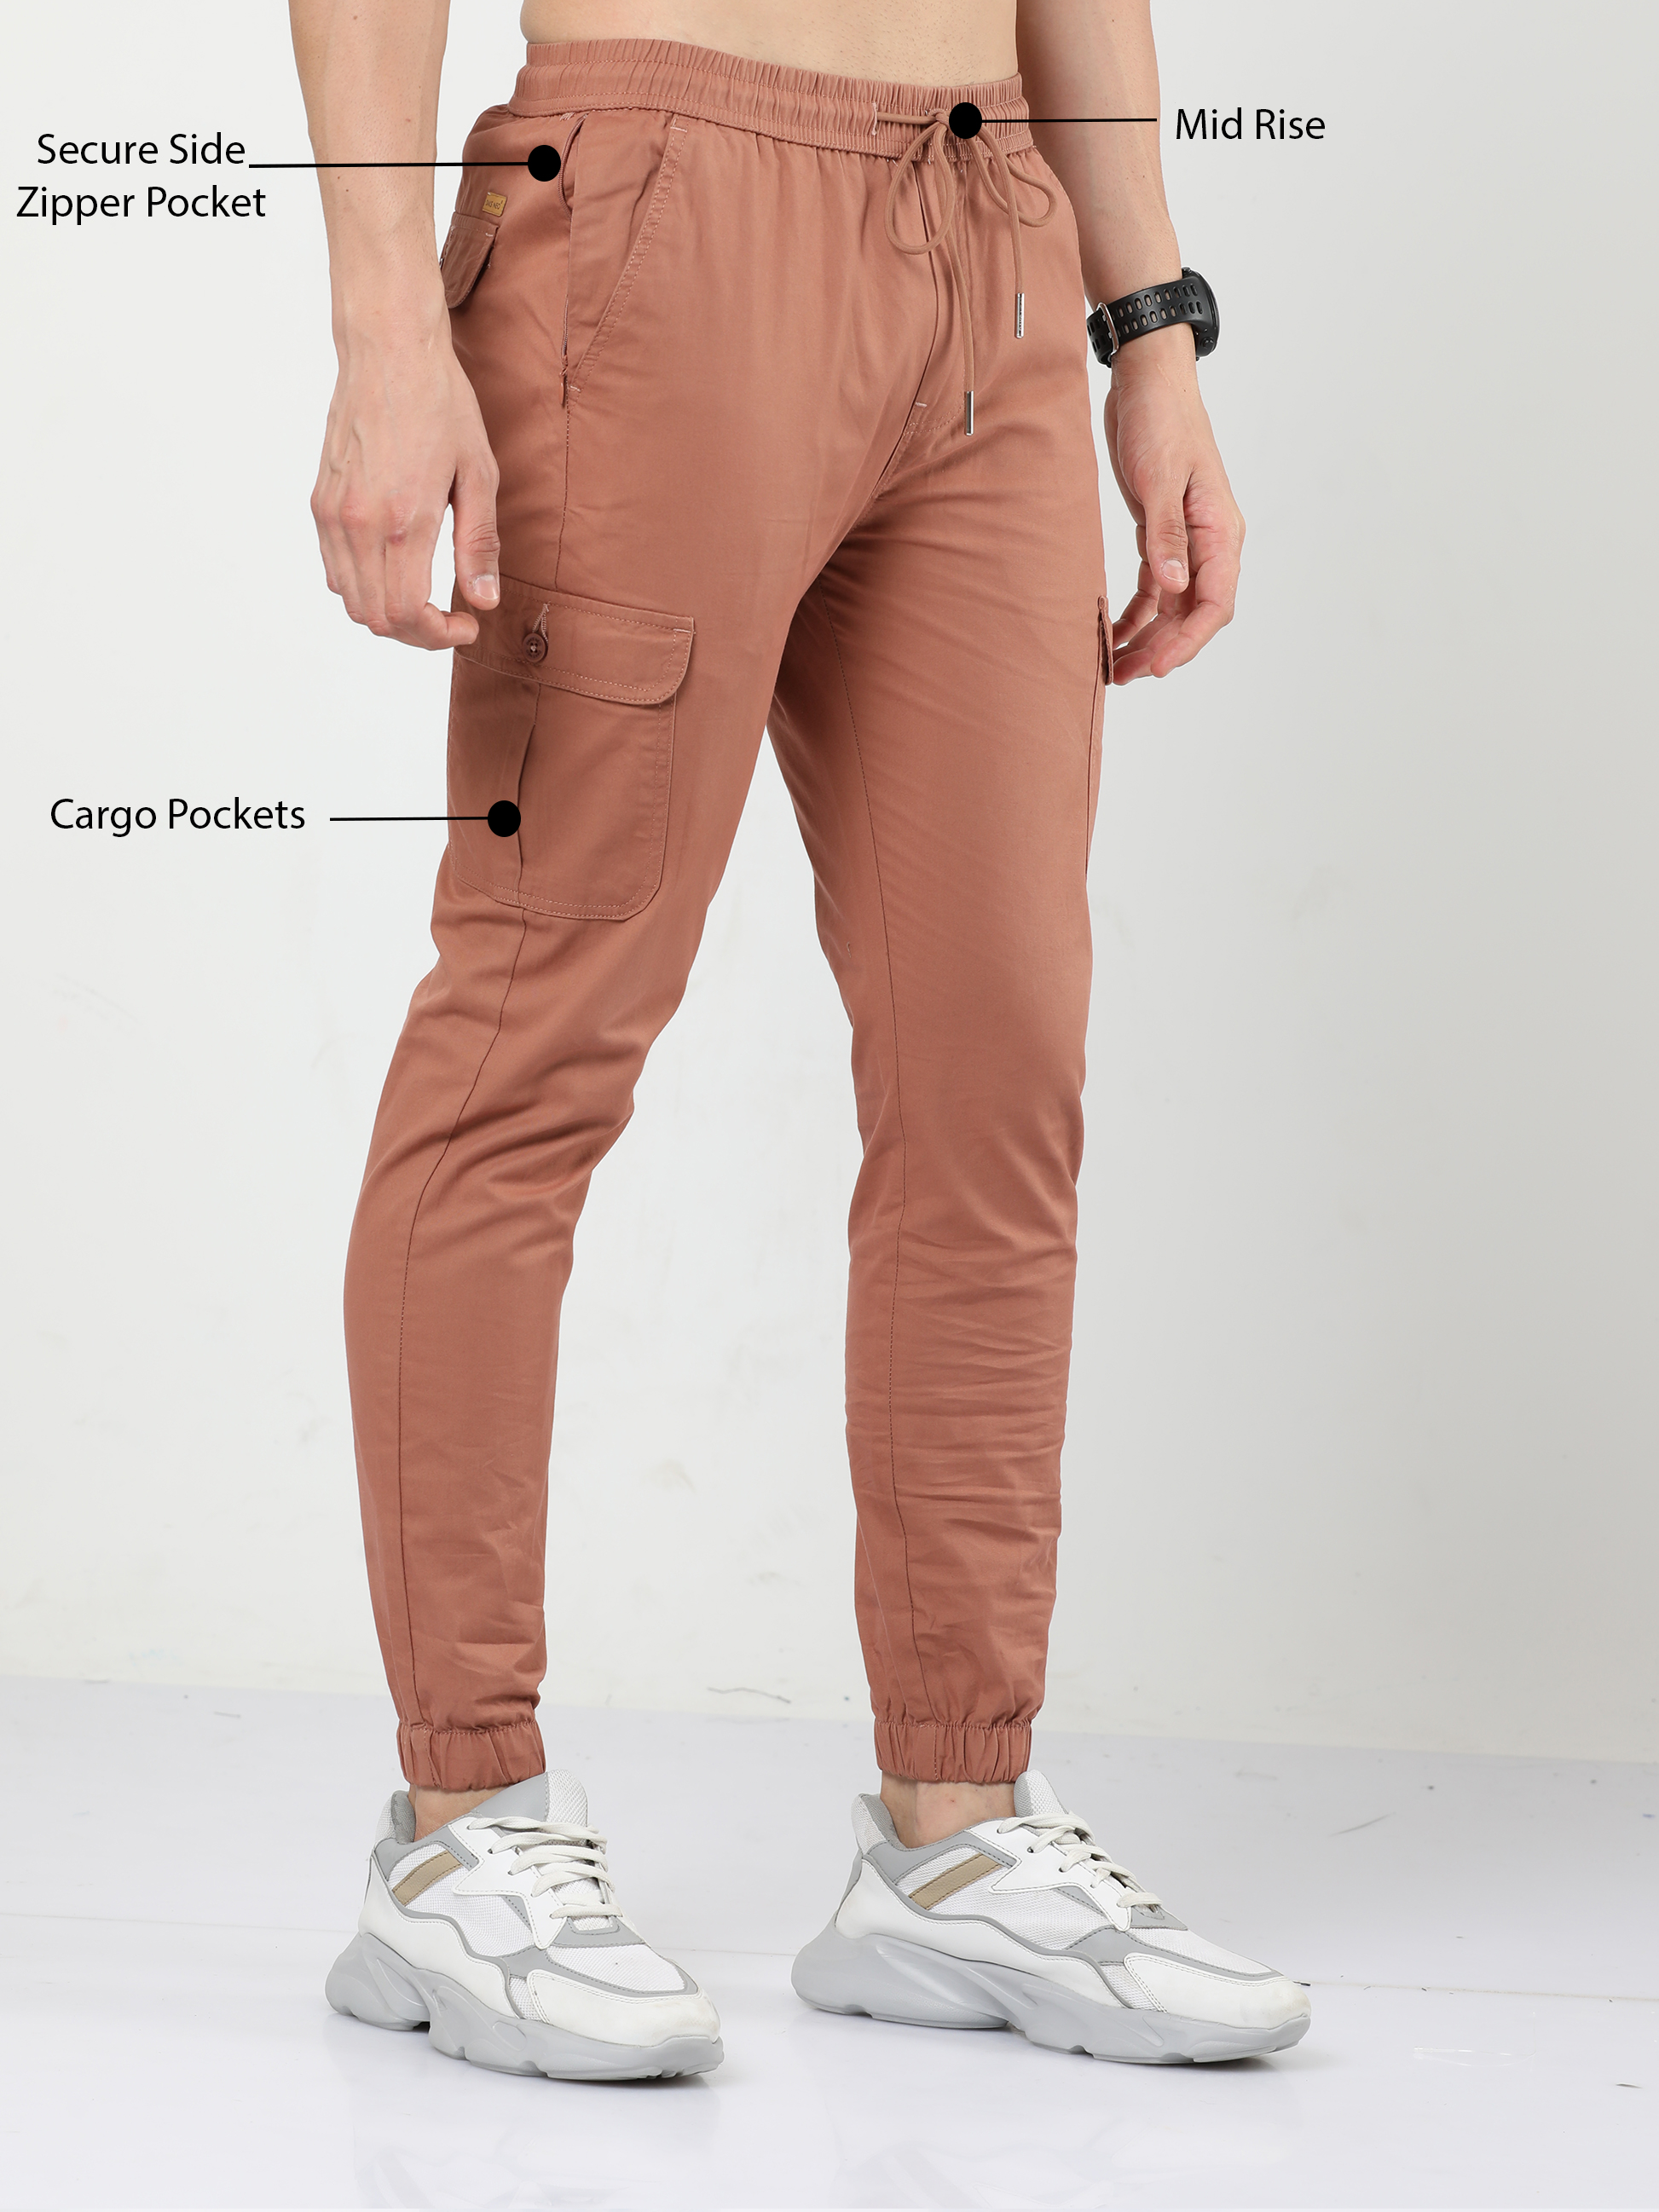 Buy Brown Trousers & Pants for Boys by ZALIO Online | Ajio.com